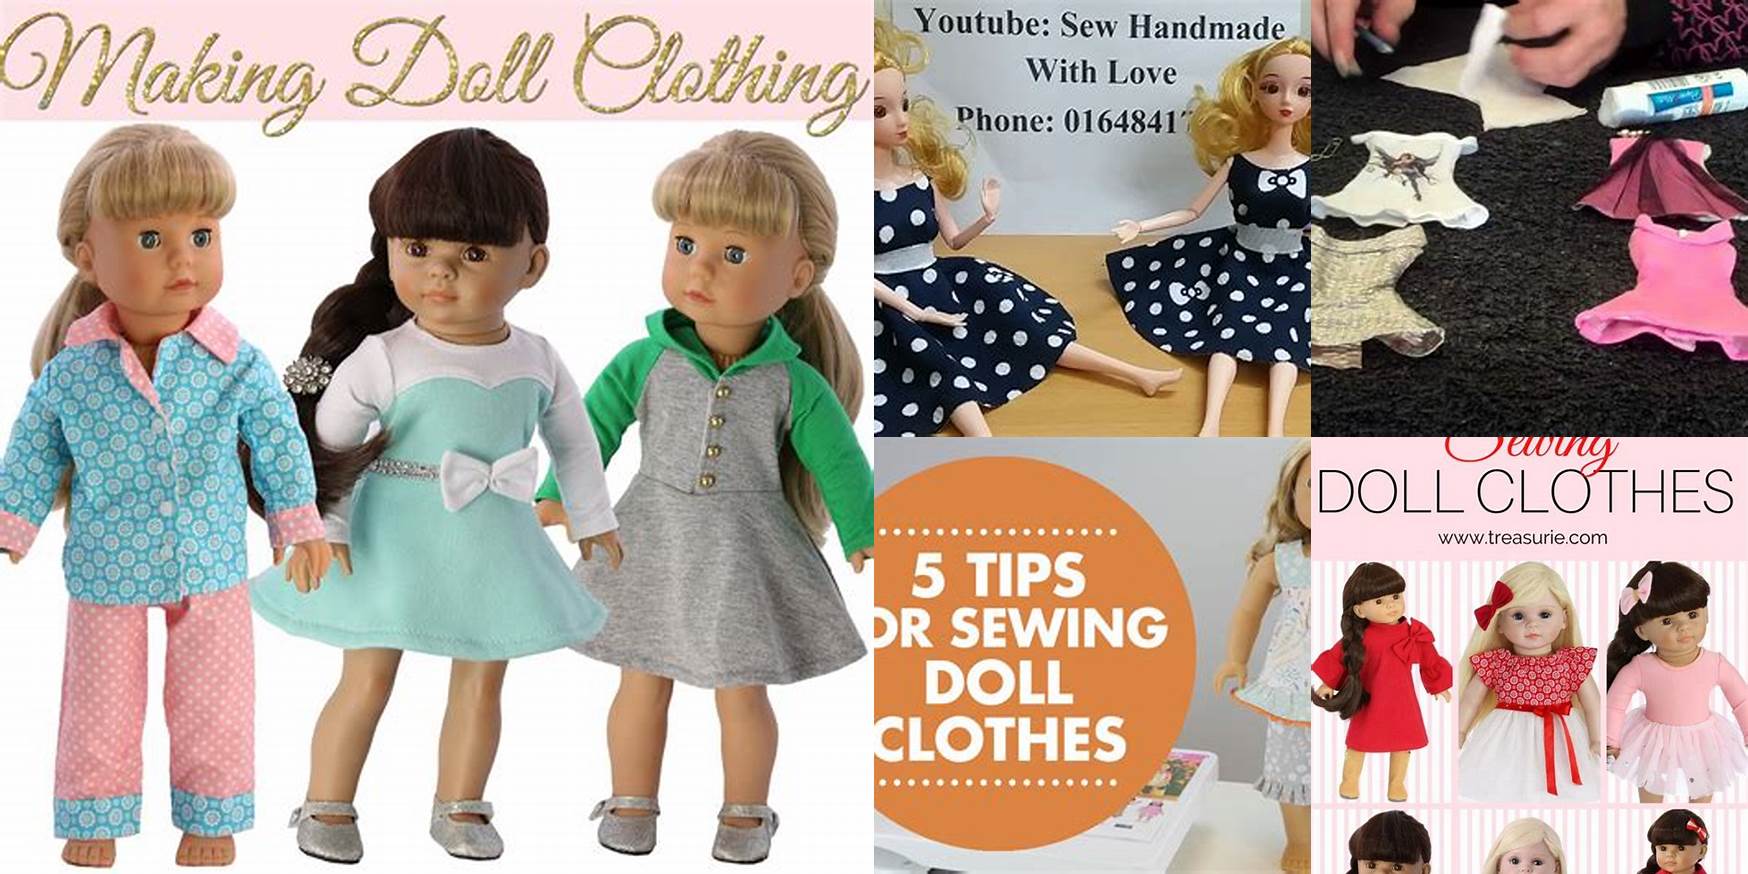 How To Sew A Dress For A Doll